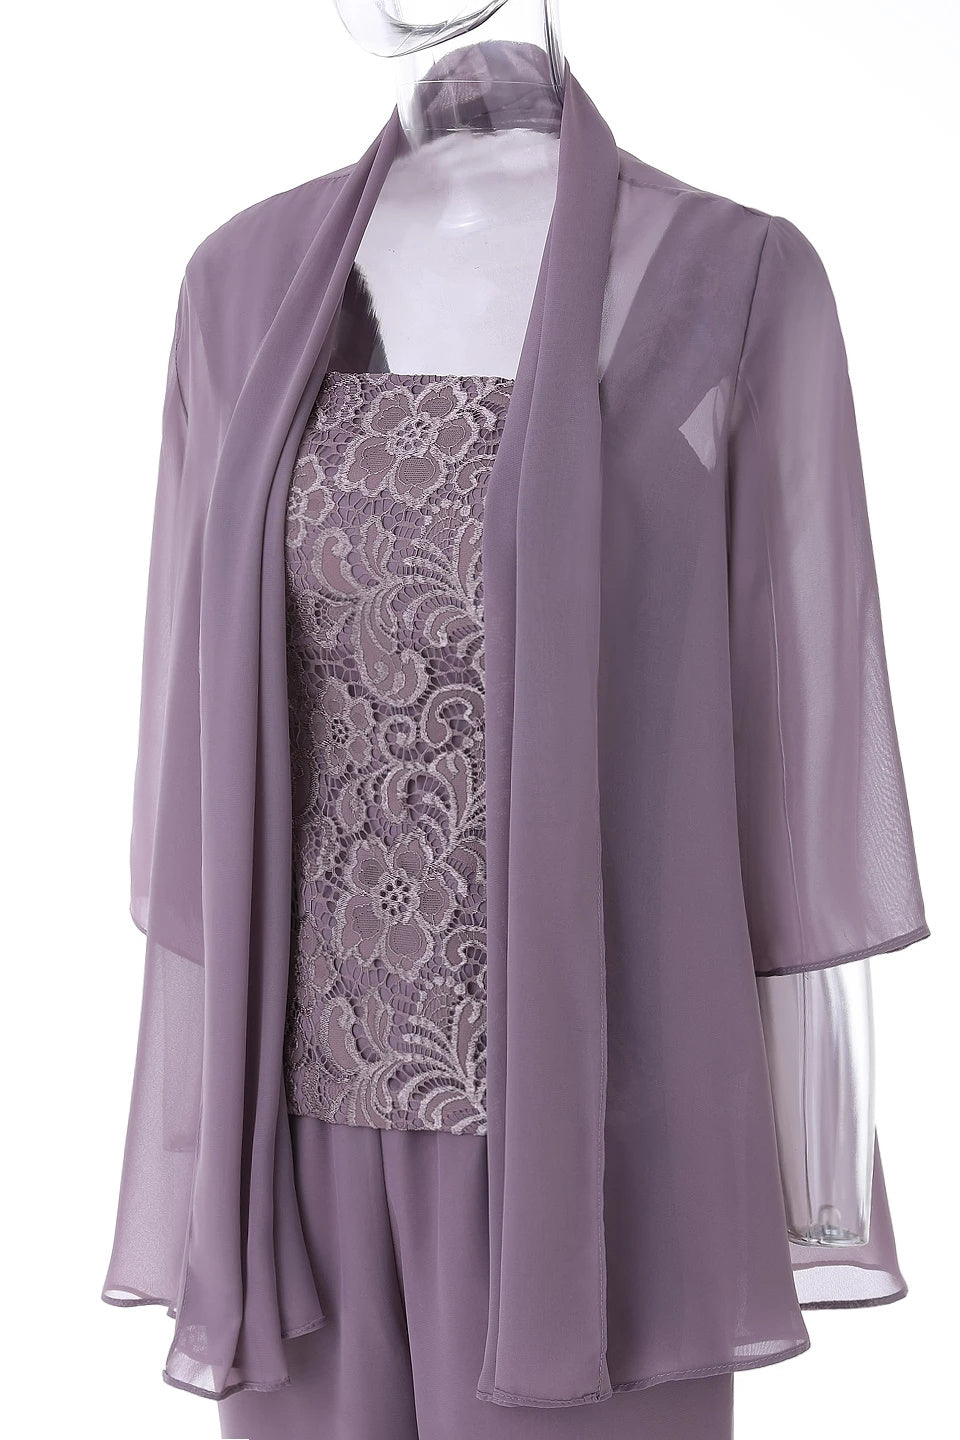 Three-Piece Mauve Square Neck Mother of the Bride Pant Suits – Dreamdressy